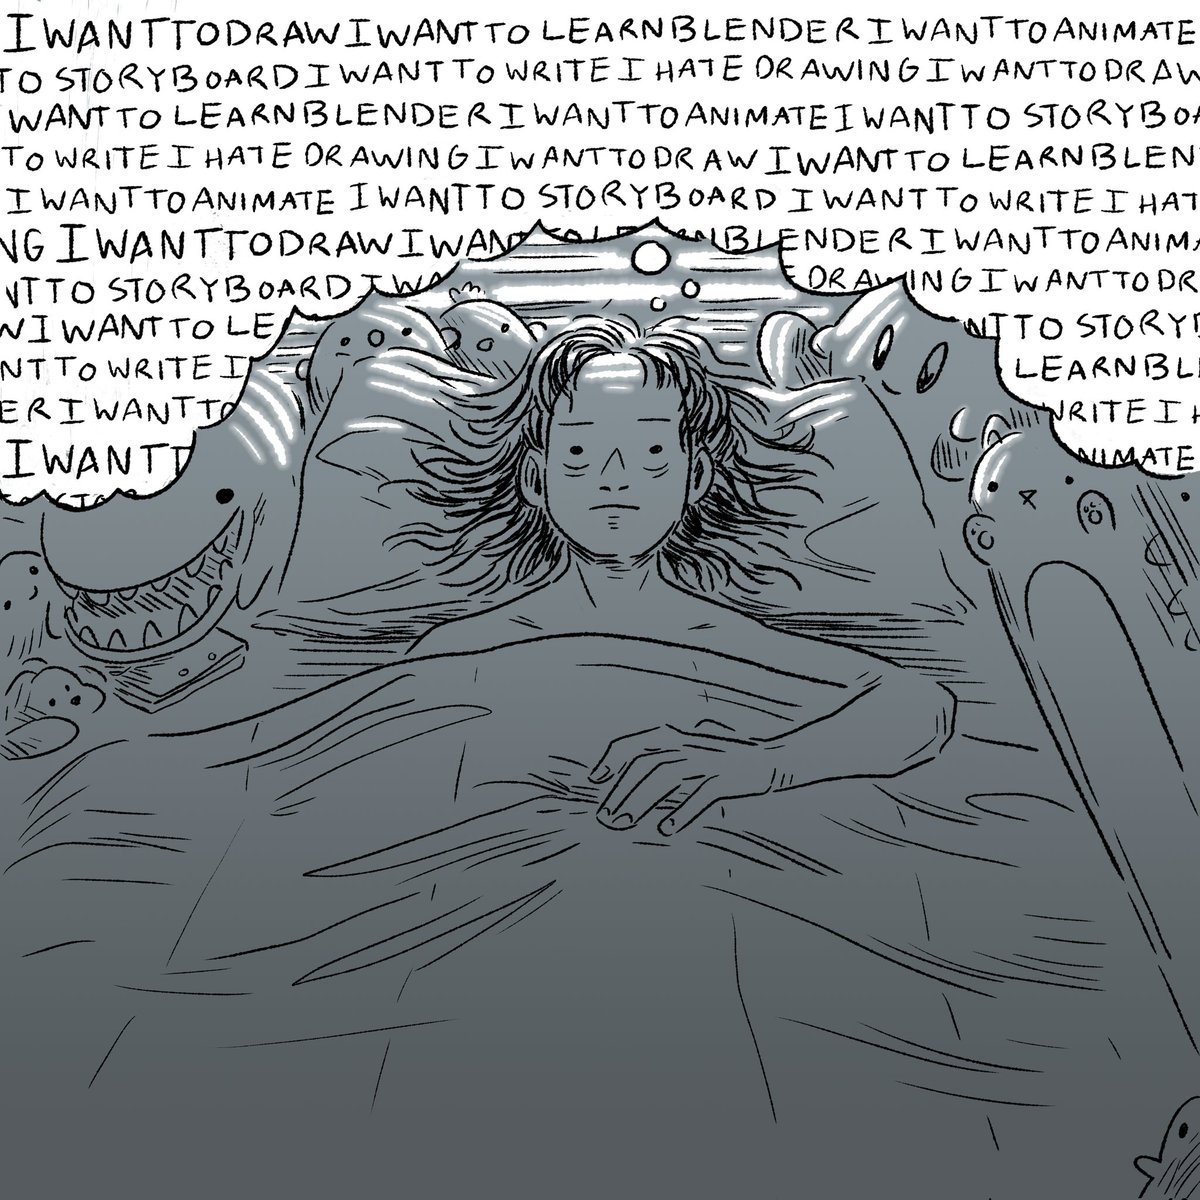 The sleepytime dilemma ~ :')
-
#artists #digitalartist #latenightthoughts #sketch #doodles #relatable ?